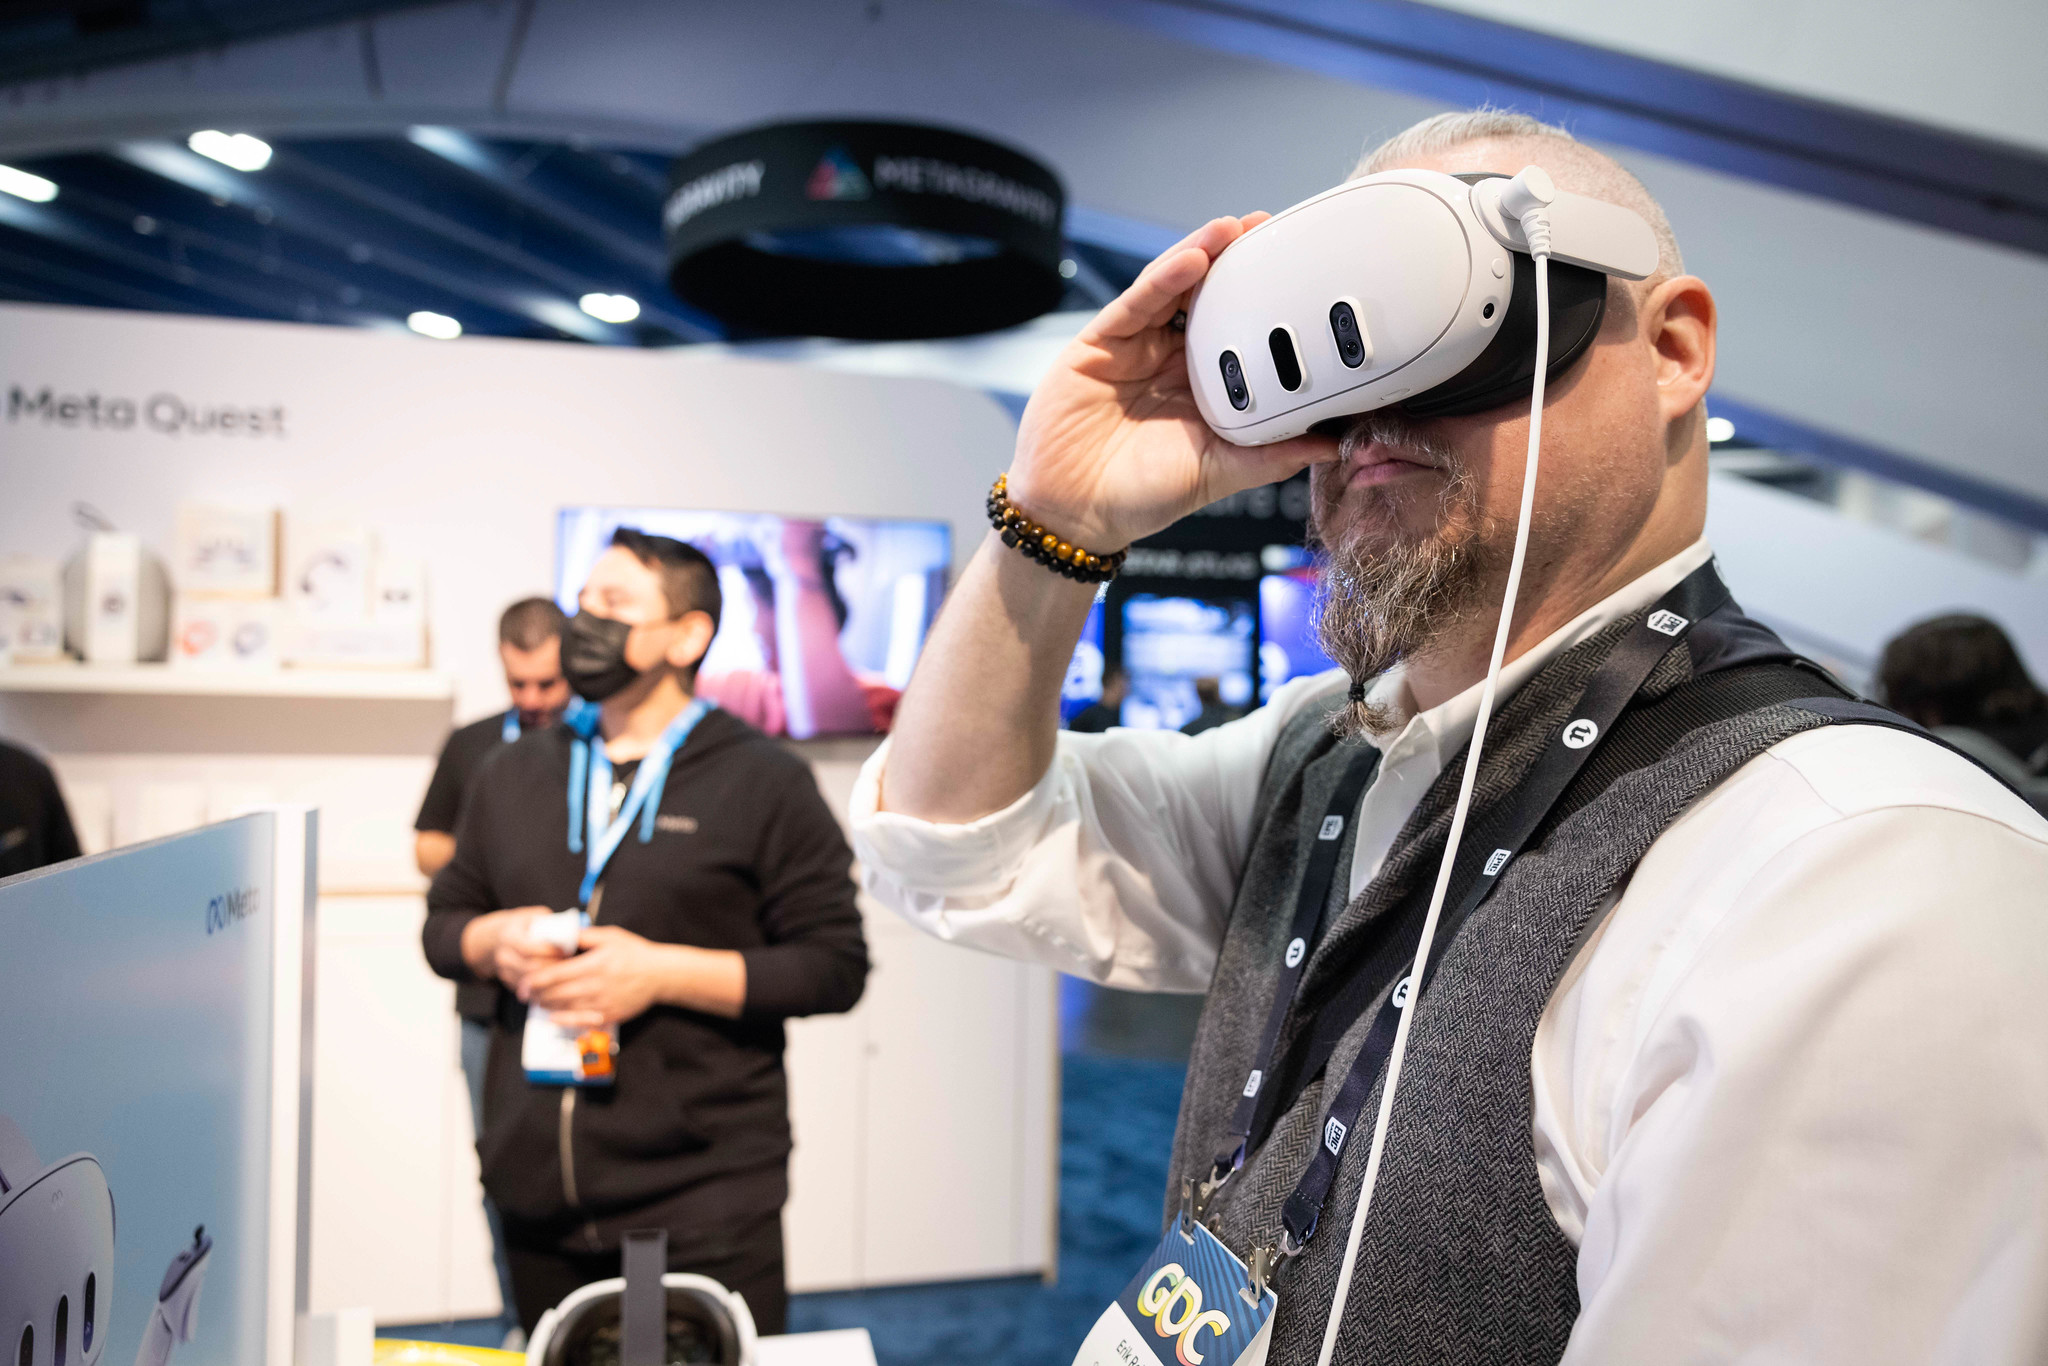 Resilience and innovation on display as the games industry looks to
bounce back at GDC 2024